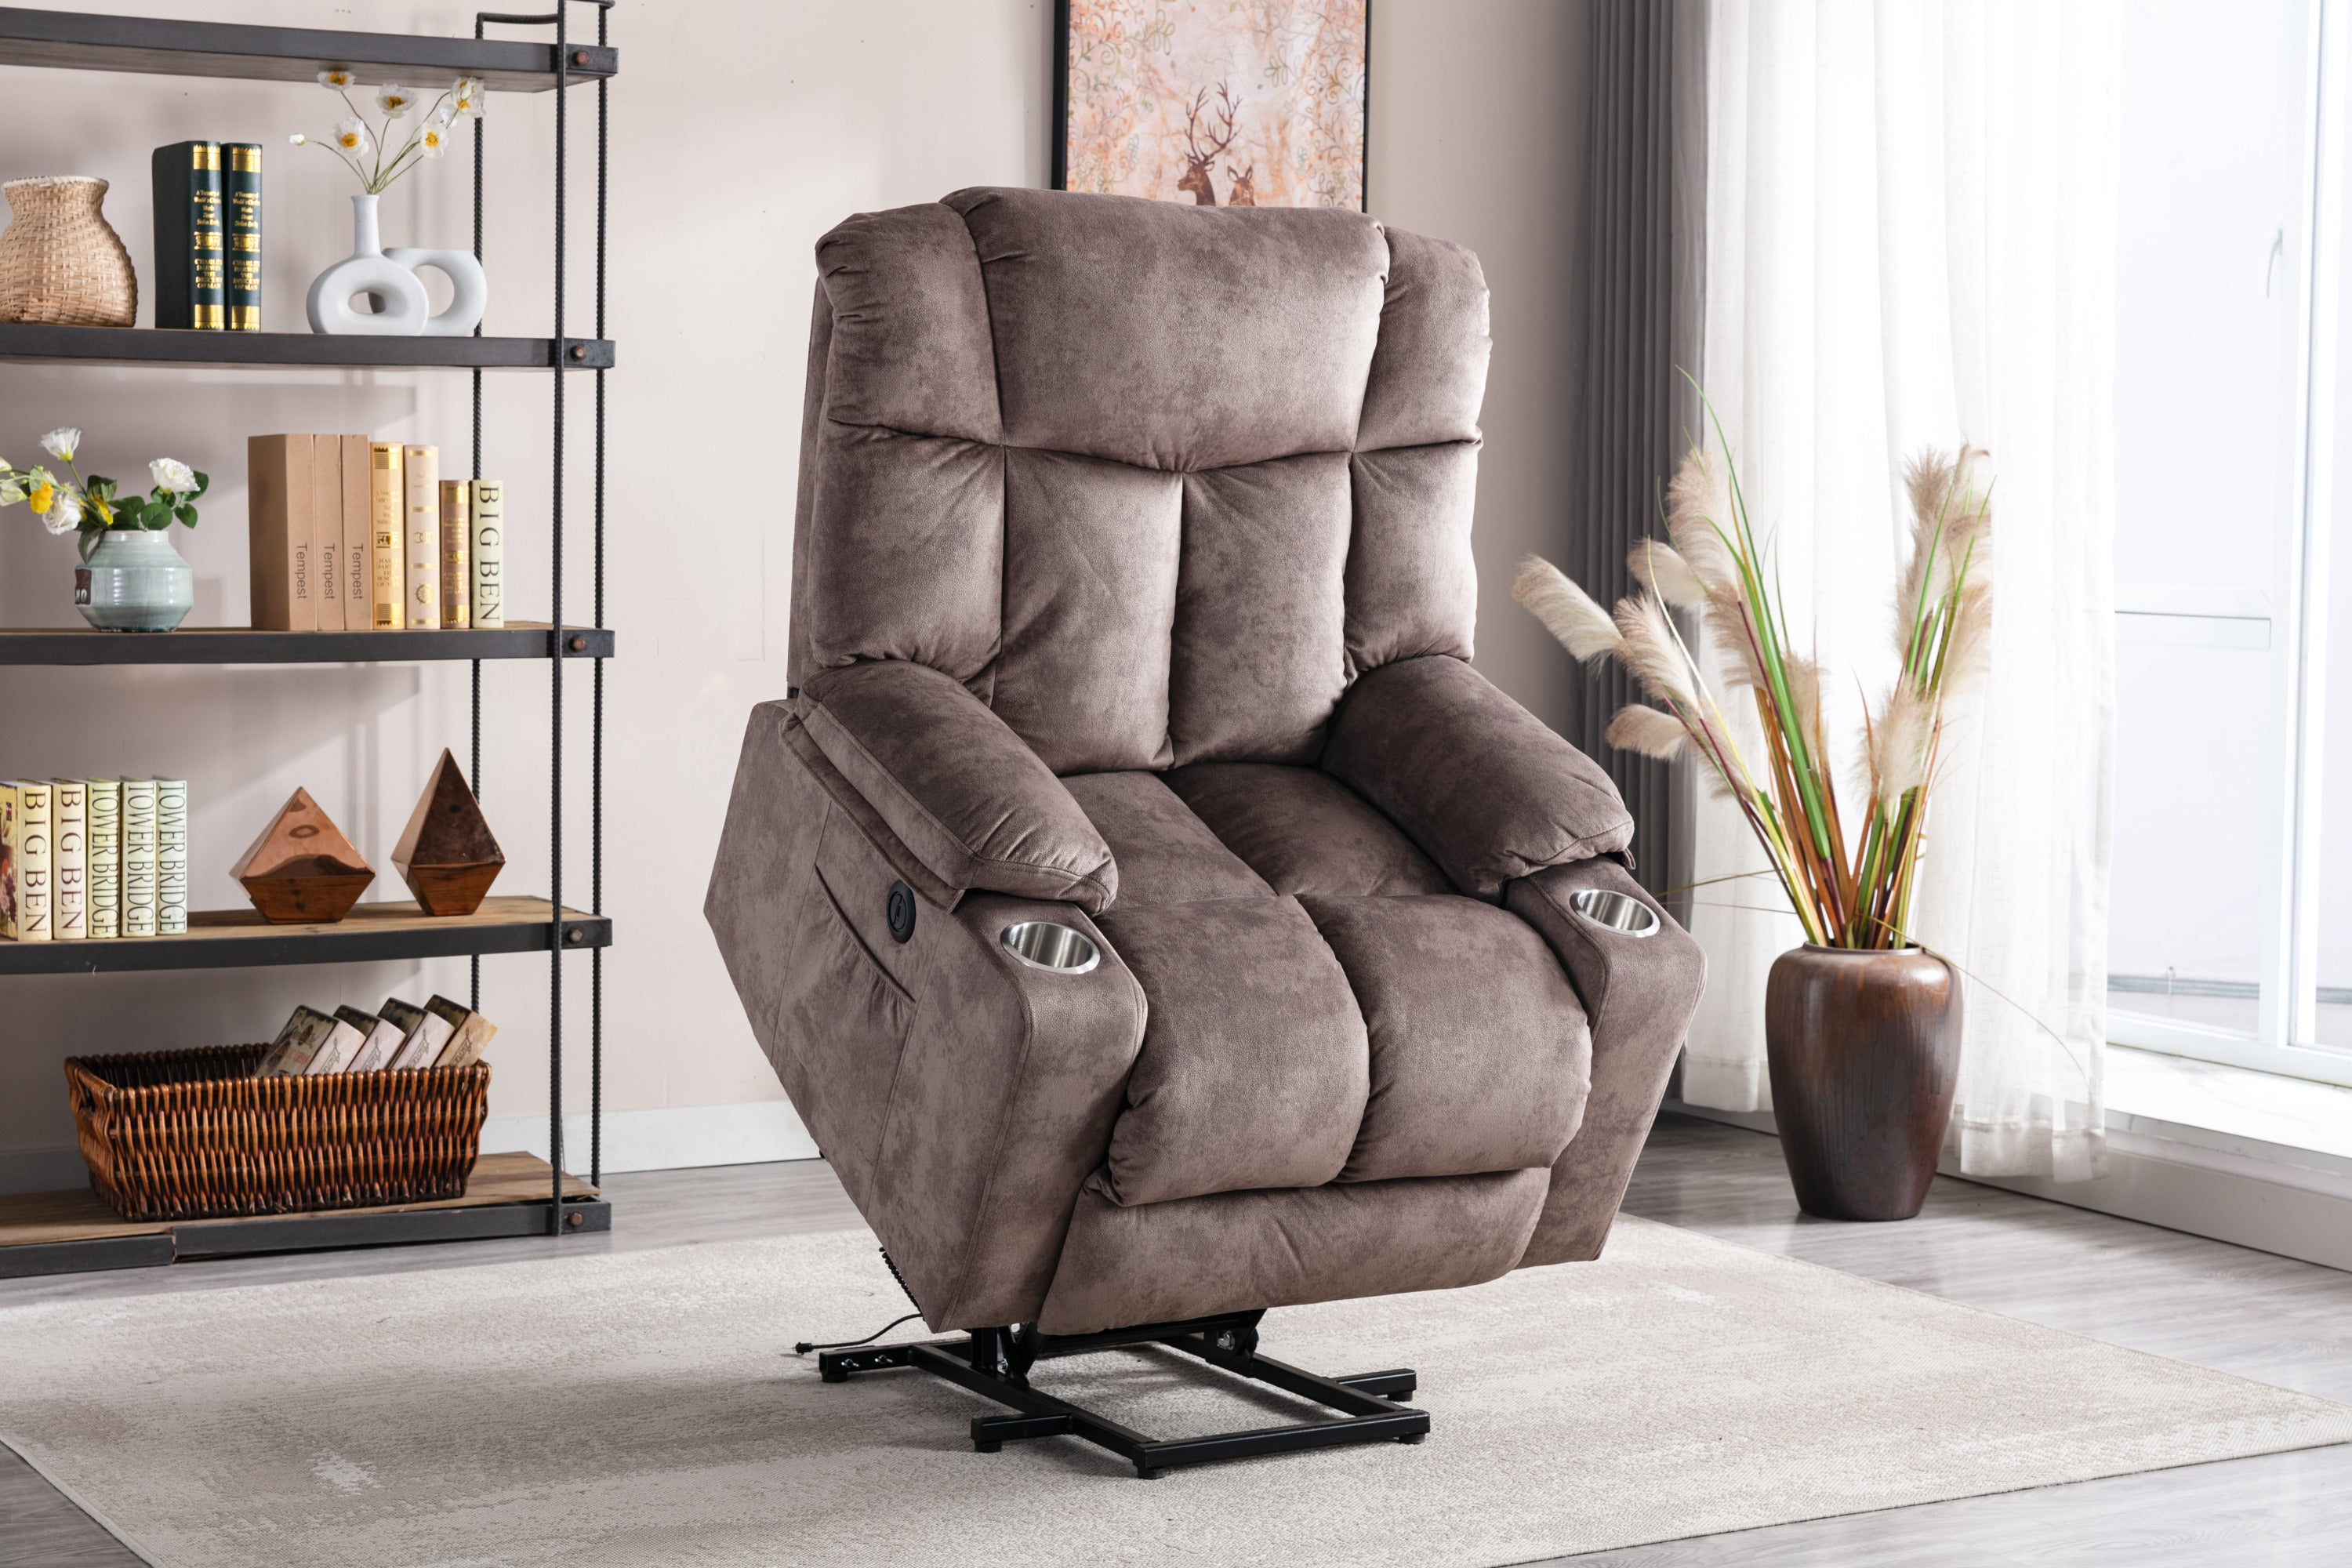 Power Lift Recliner Chair with Washable Cover, angle view lifted